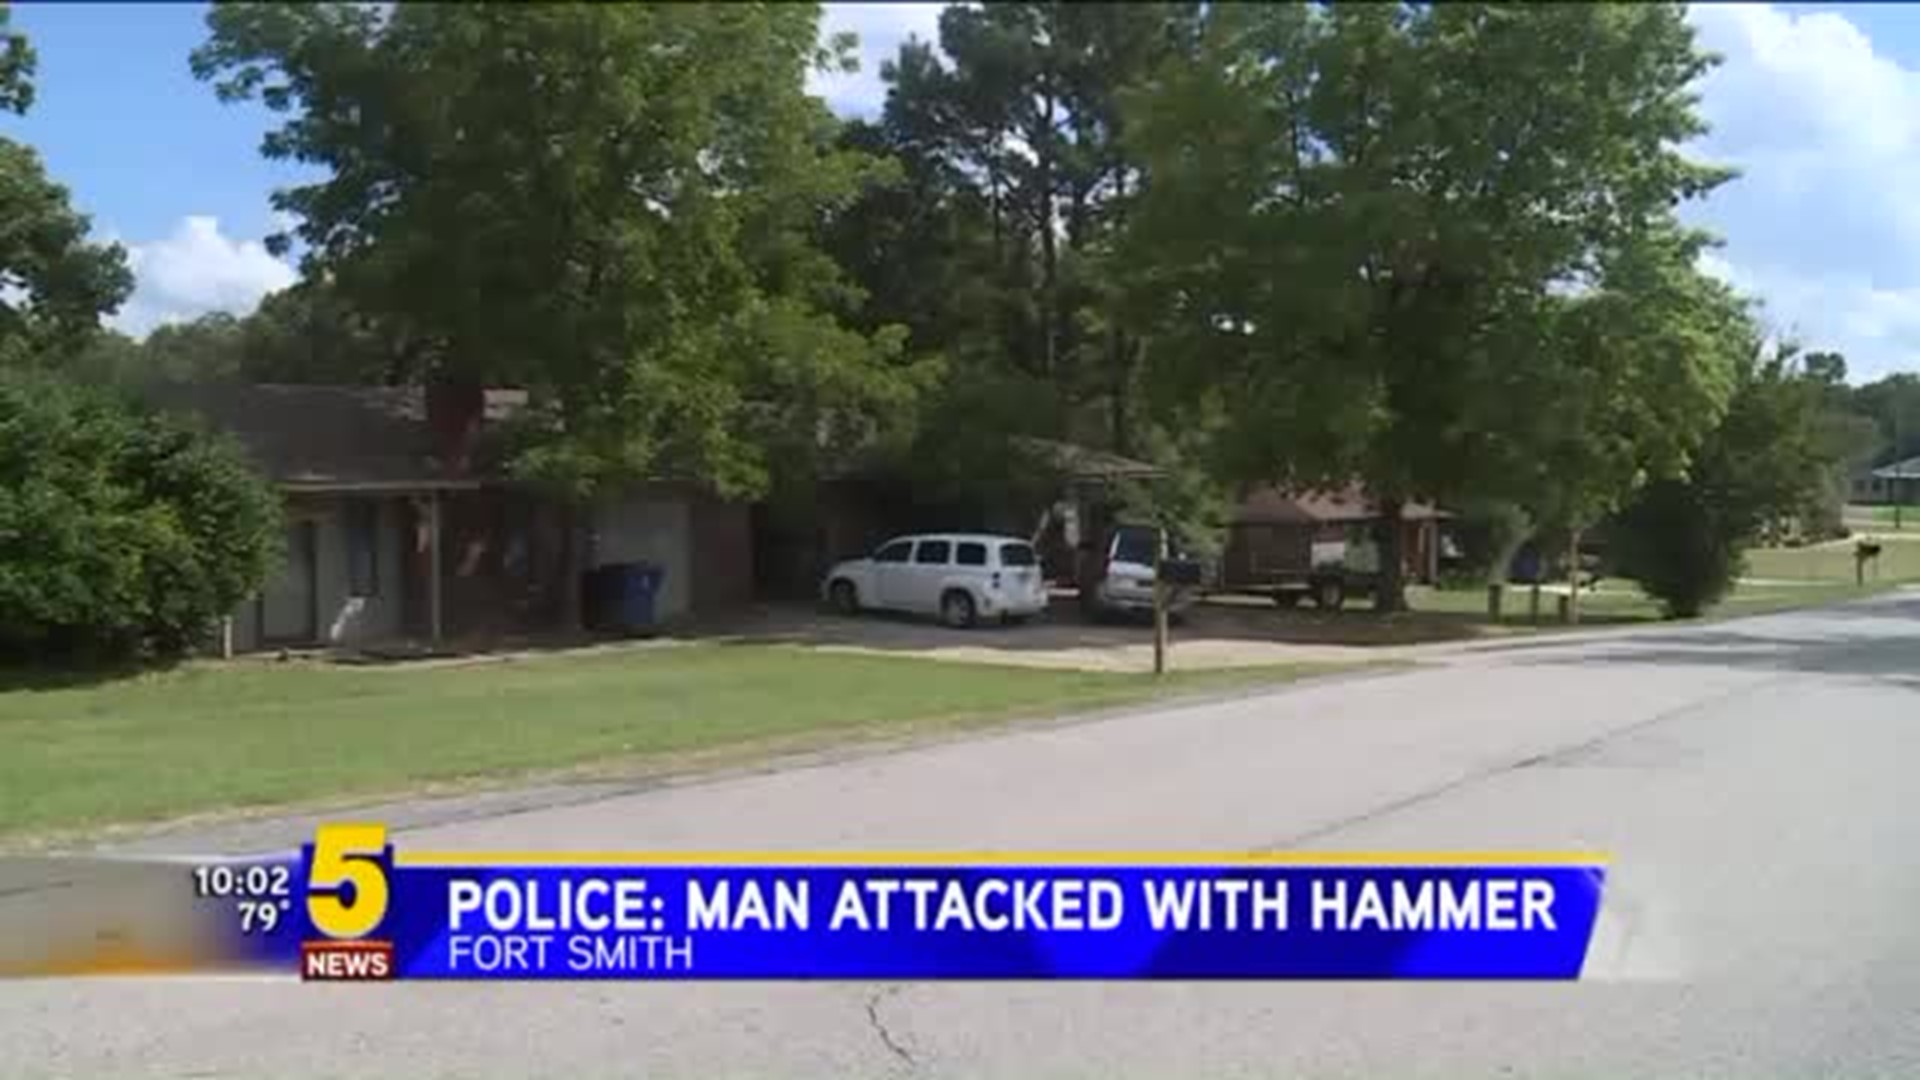 Police: Fort Smith Man Attacked With Hammer